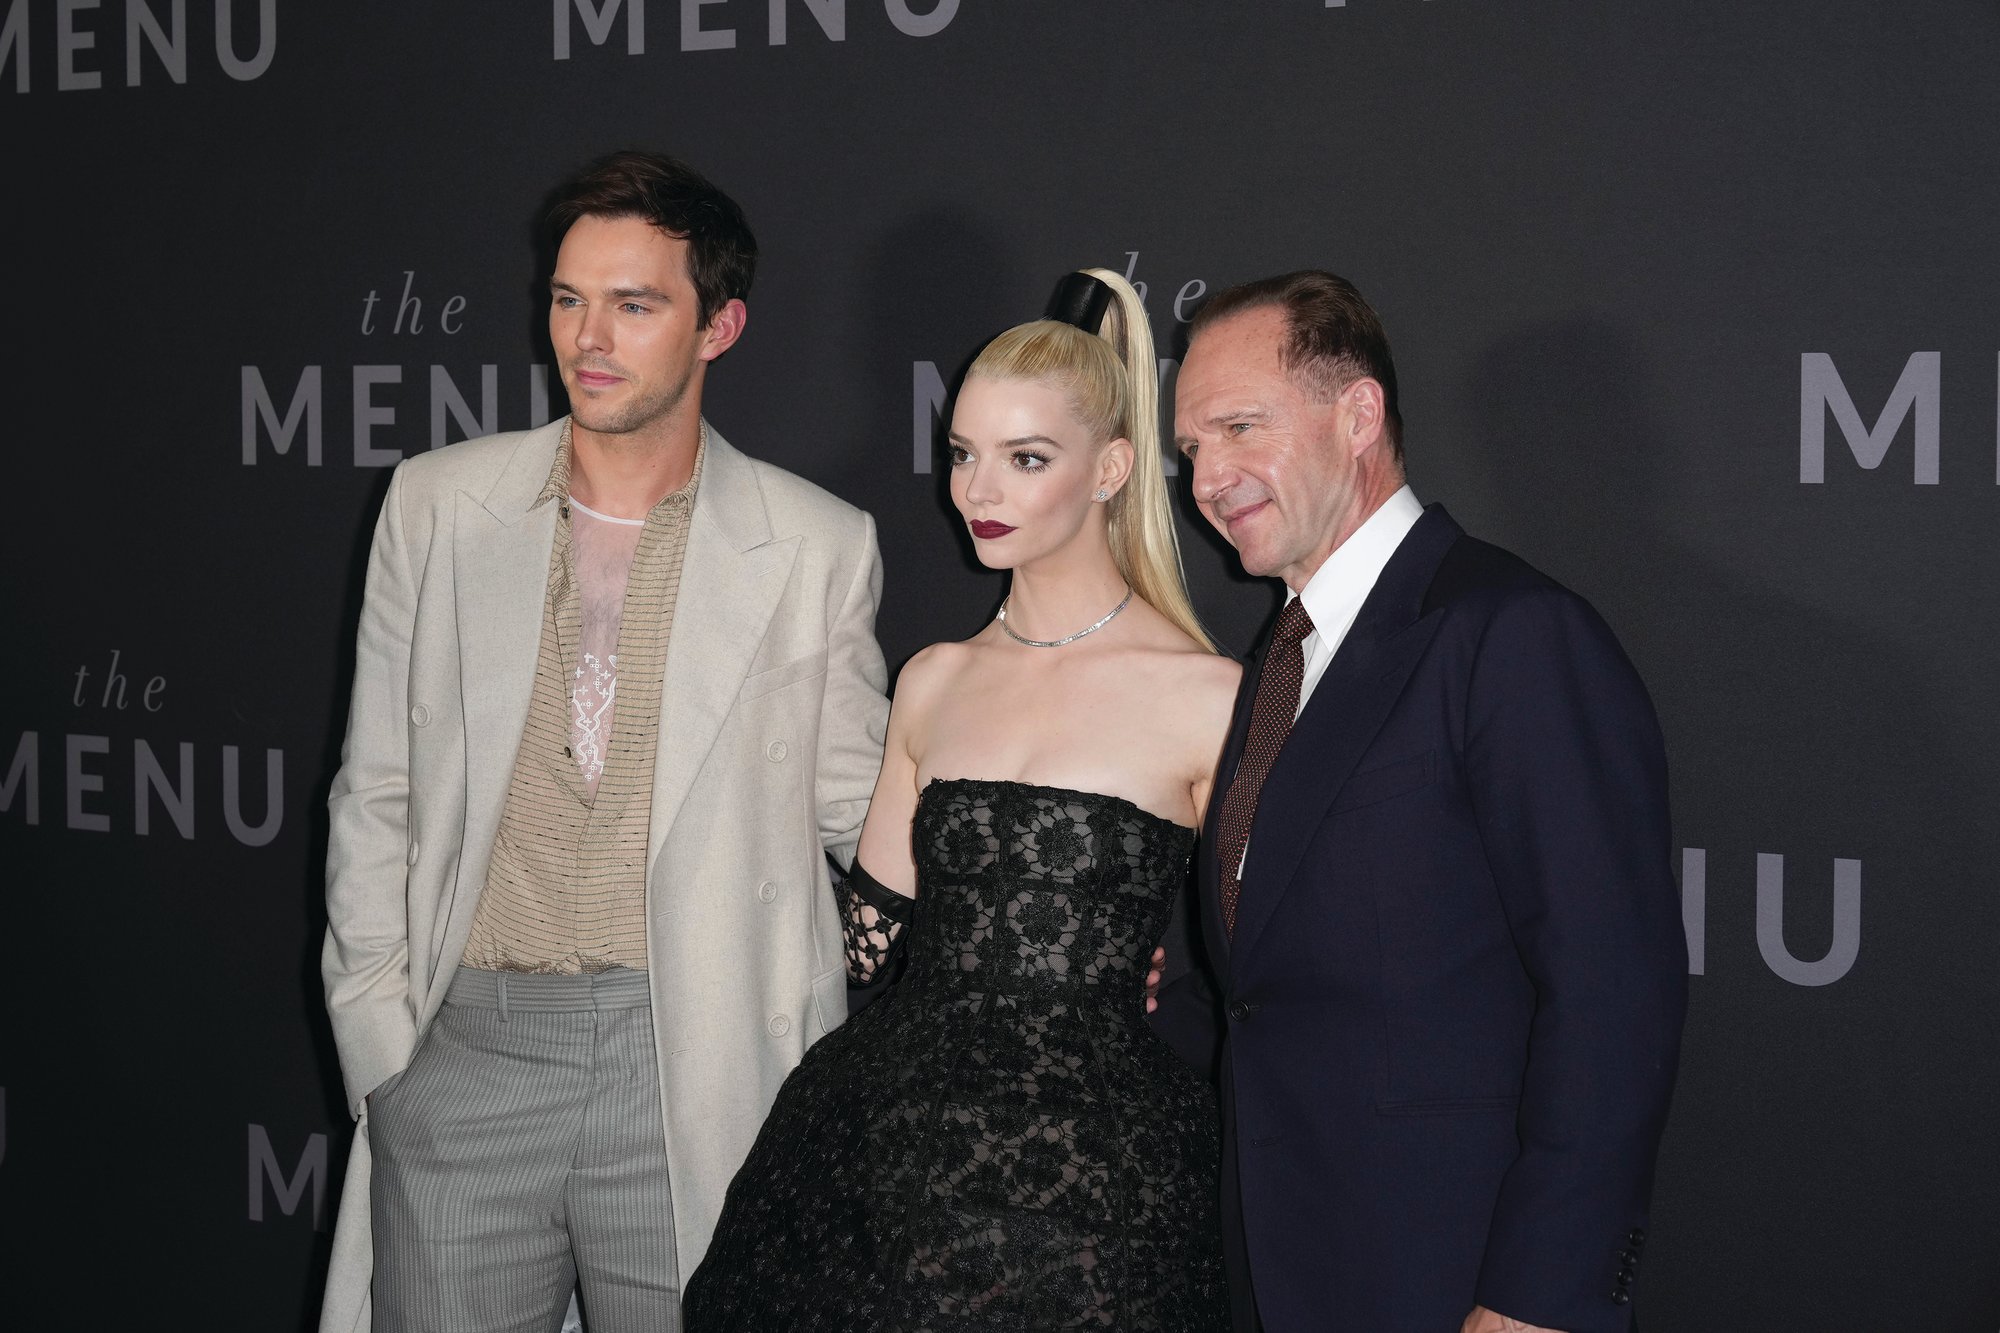 From left, Nicholas Hoult, Anya Taylor-Joy and Ralph Fiennes attend the New York premiere of "The Menu" at AMC Lincoln Square Theater on Nov. 14 in New York City.